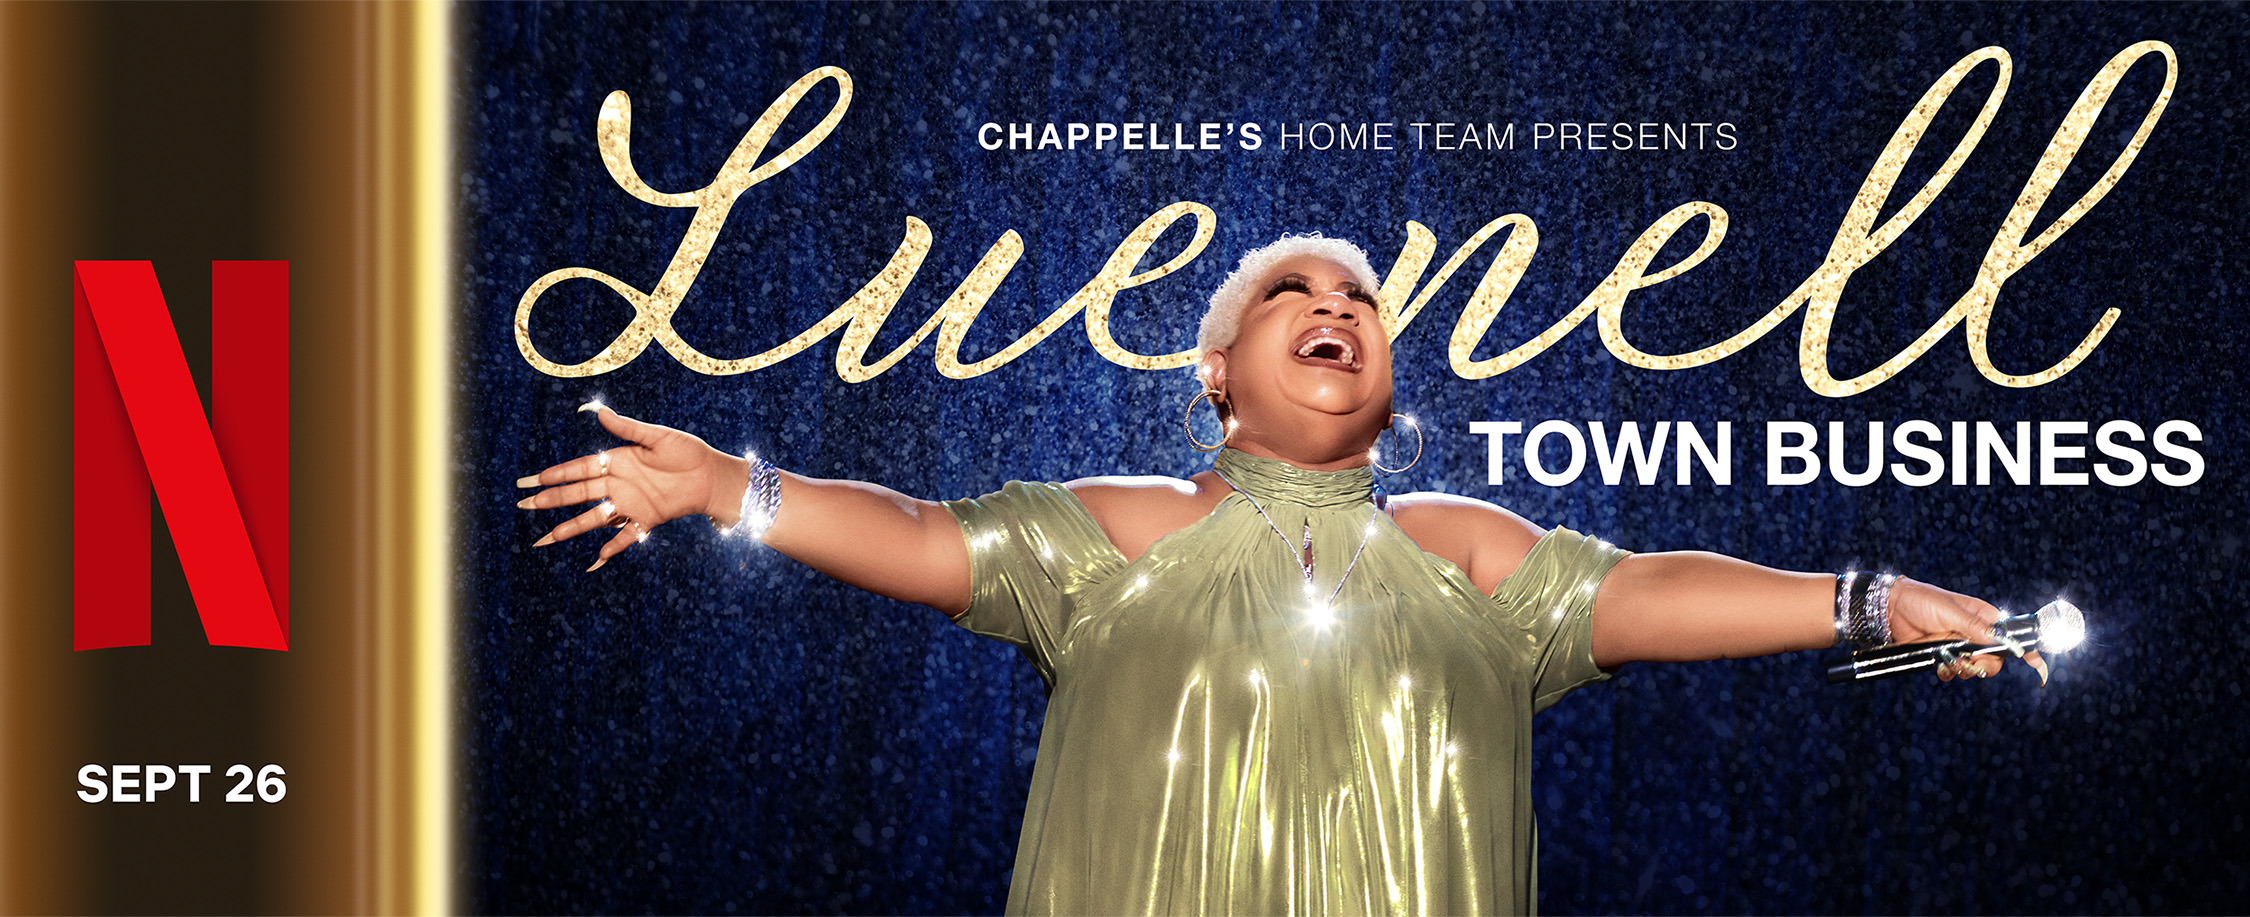 Mega Sized TV Poster Image for Luenell: Town Business 